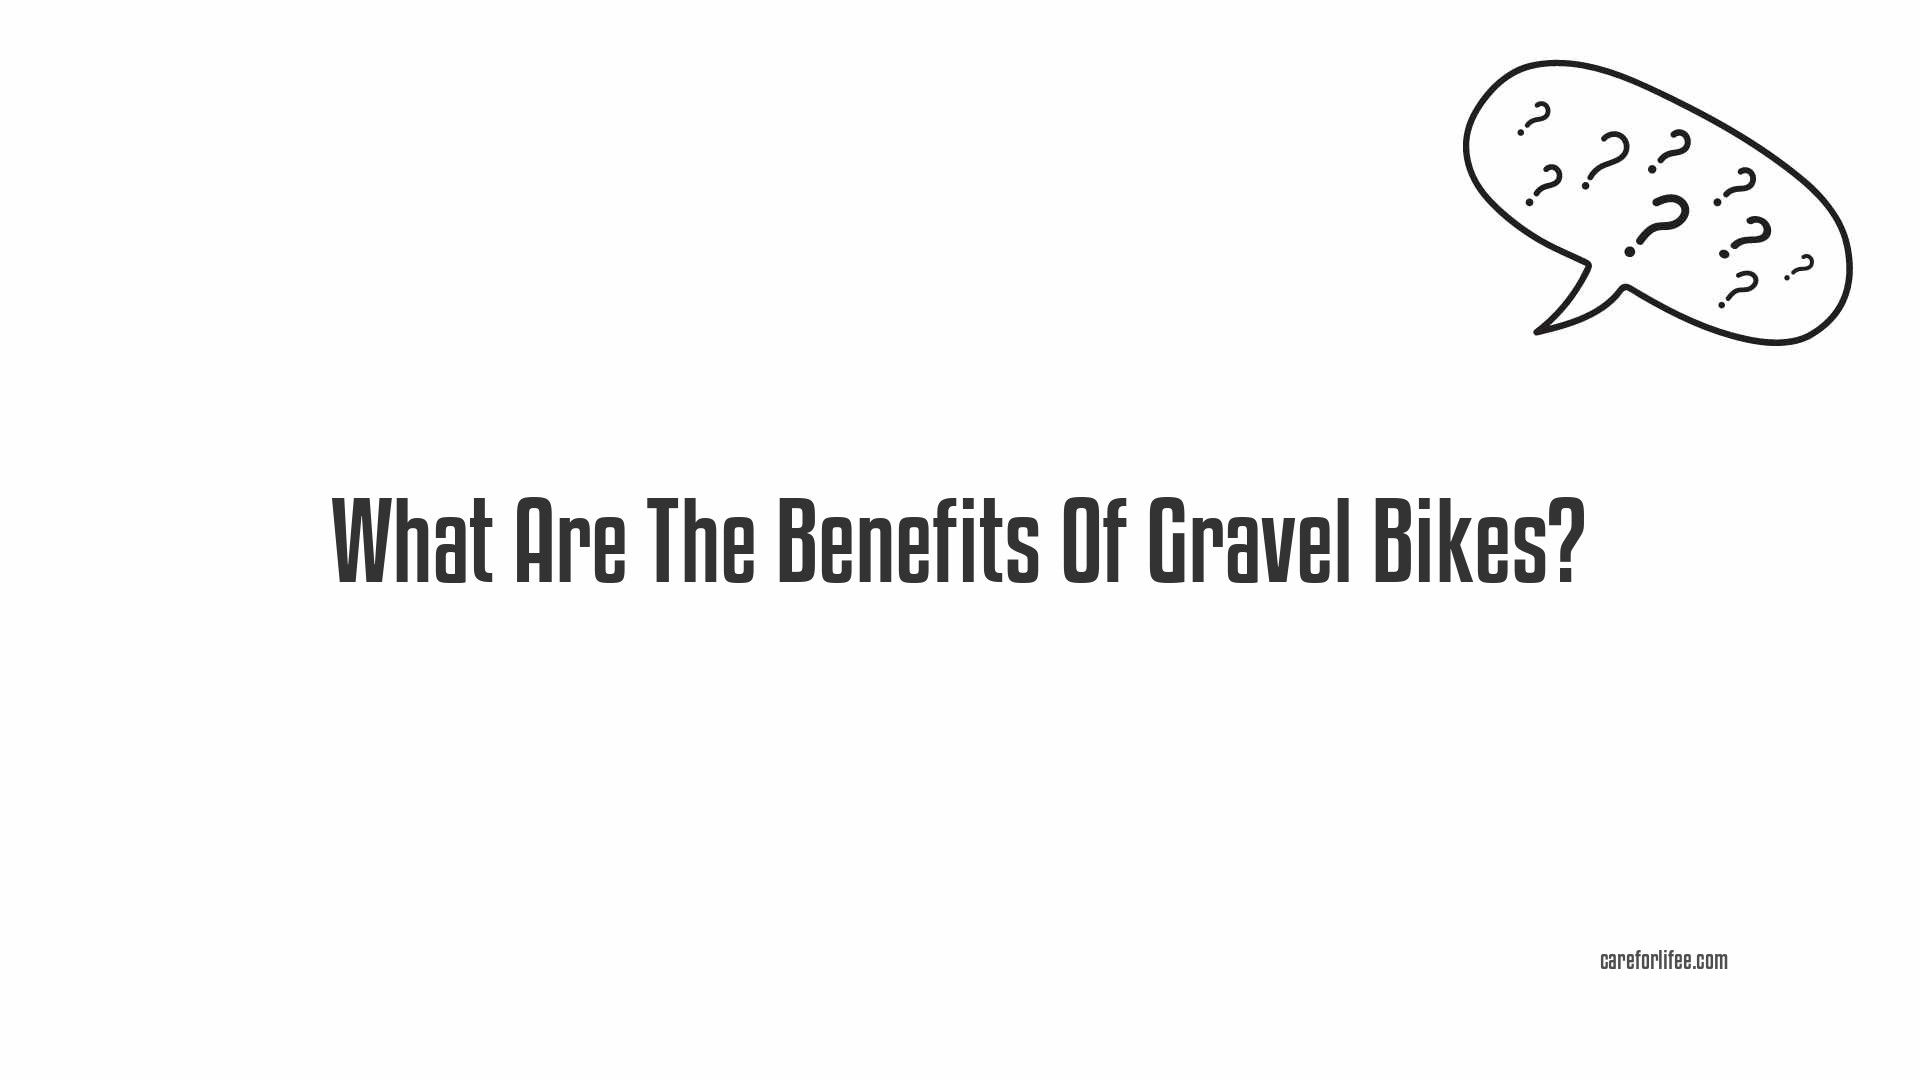 What Are The Benefits Of Gravel Bikes?